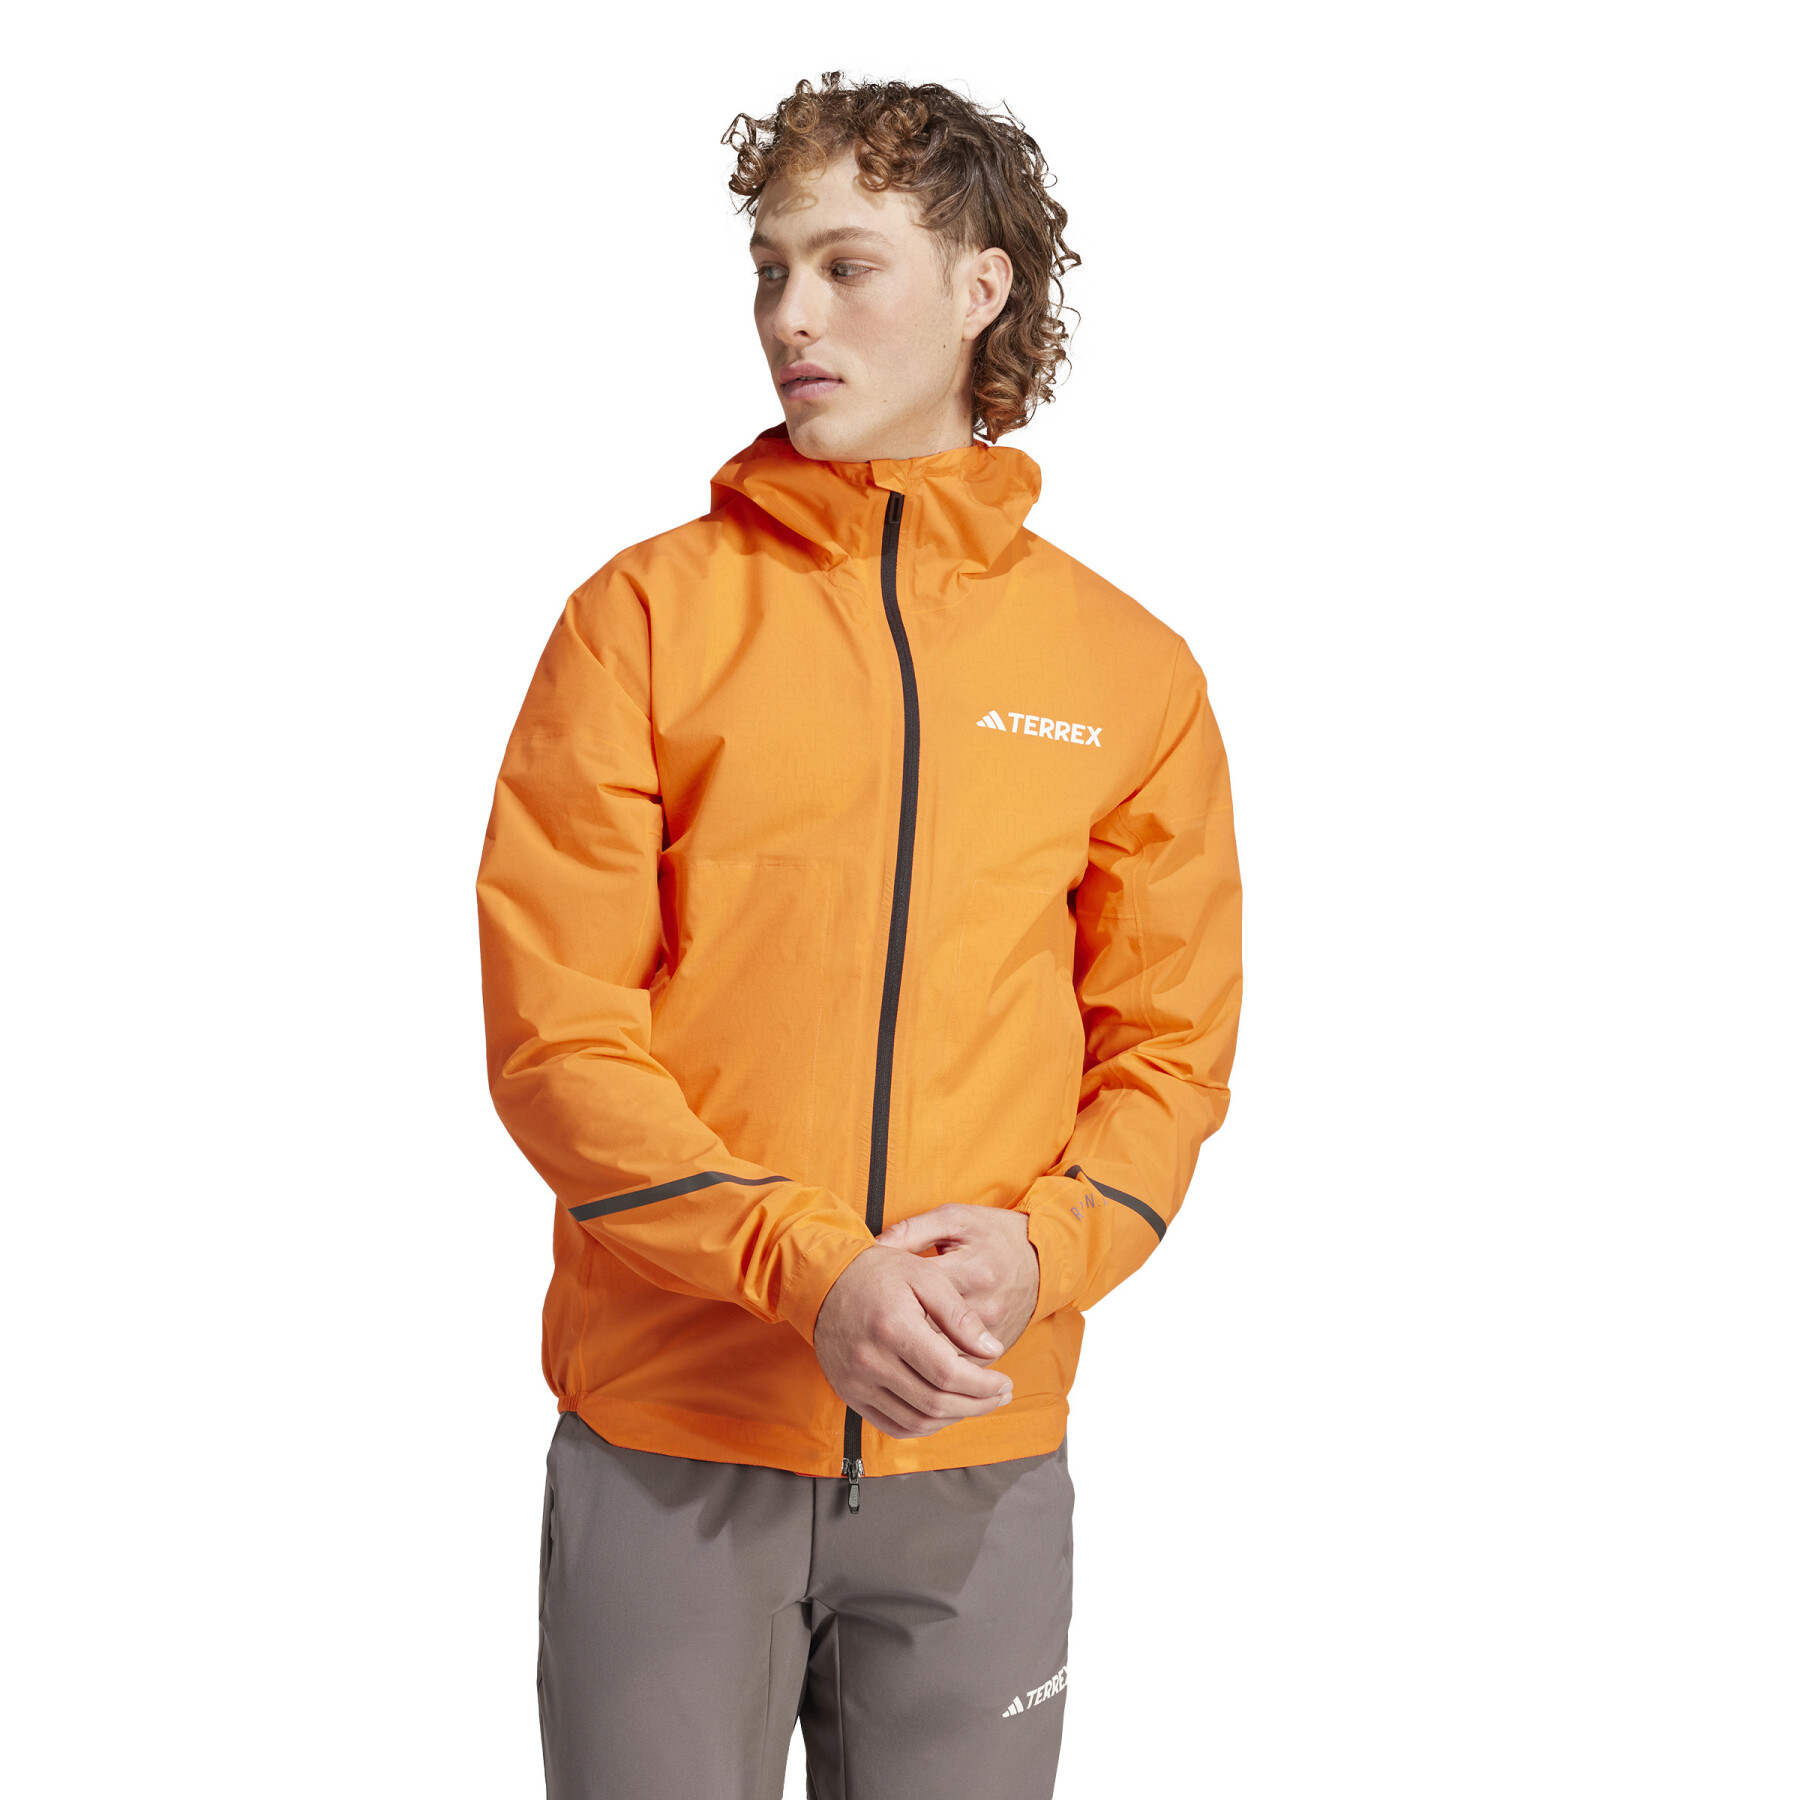 Chaqueta impermeable adidas XPR